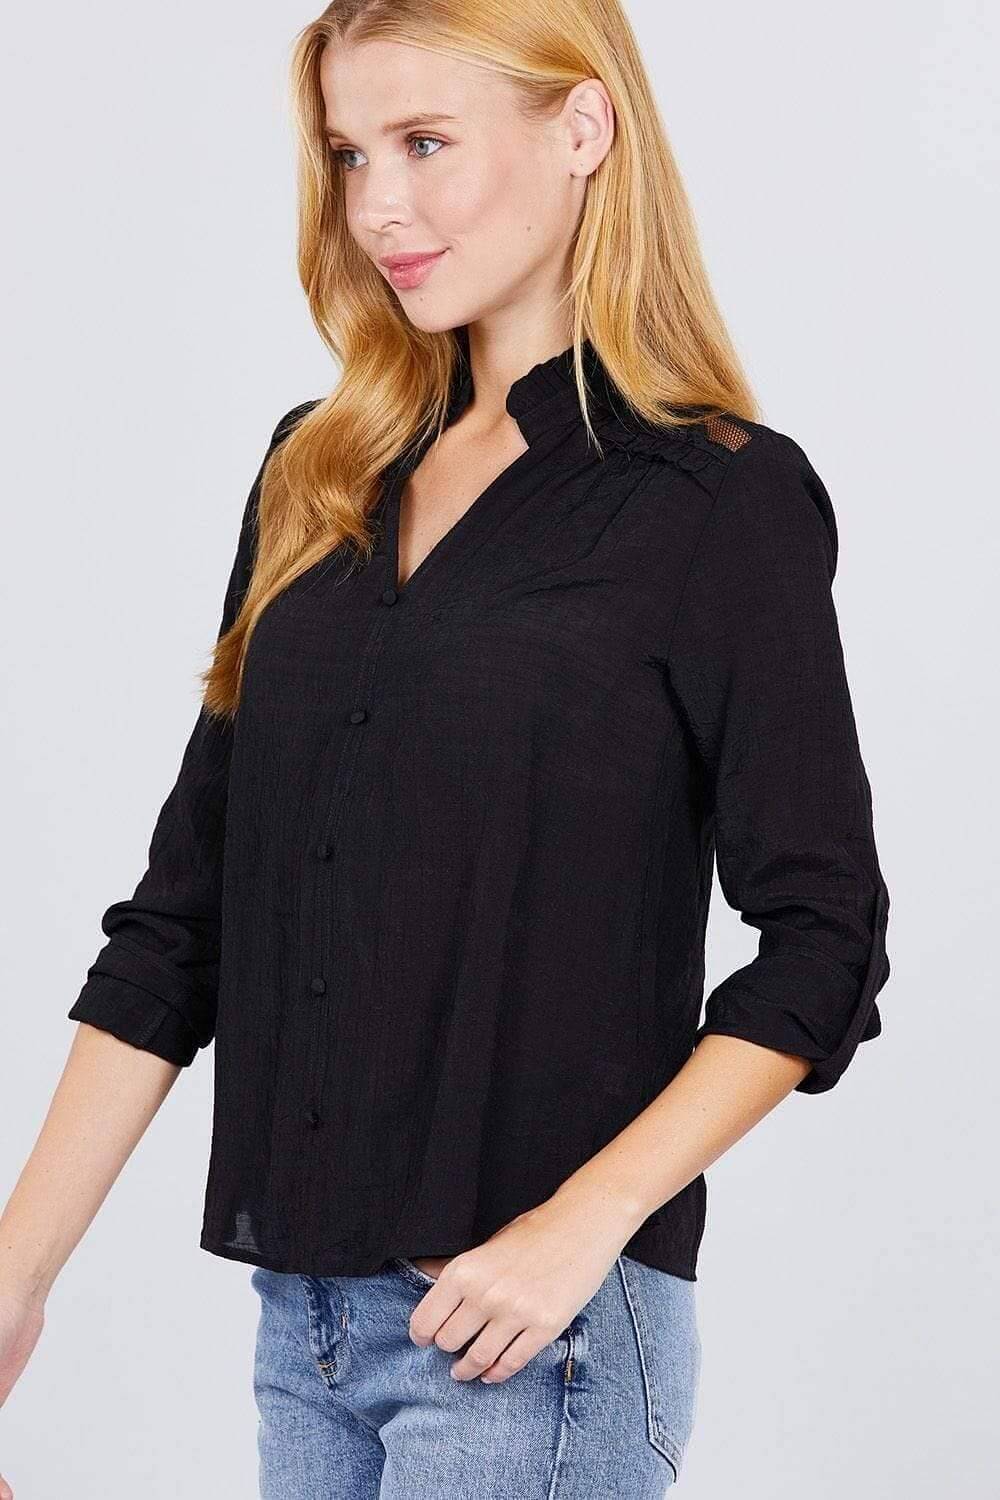 Black Long Sleeve V-Neck Button Down Top - Shopping Therapy Top